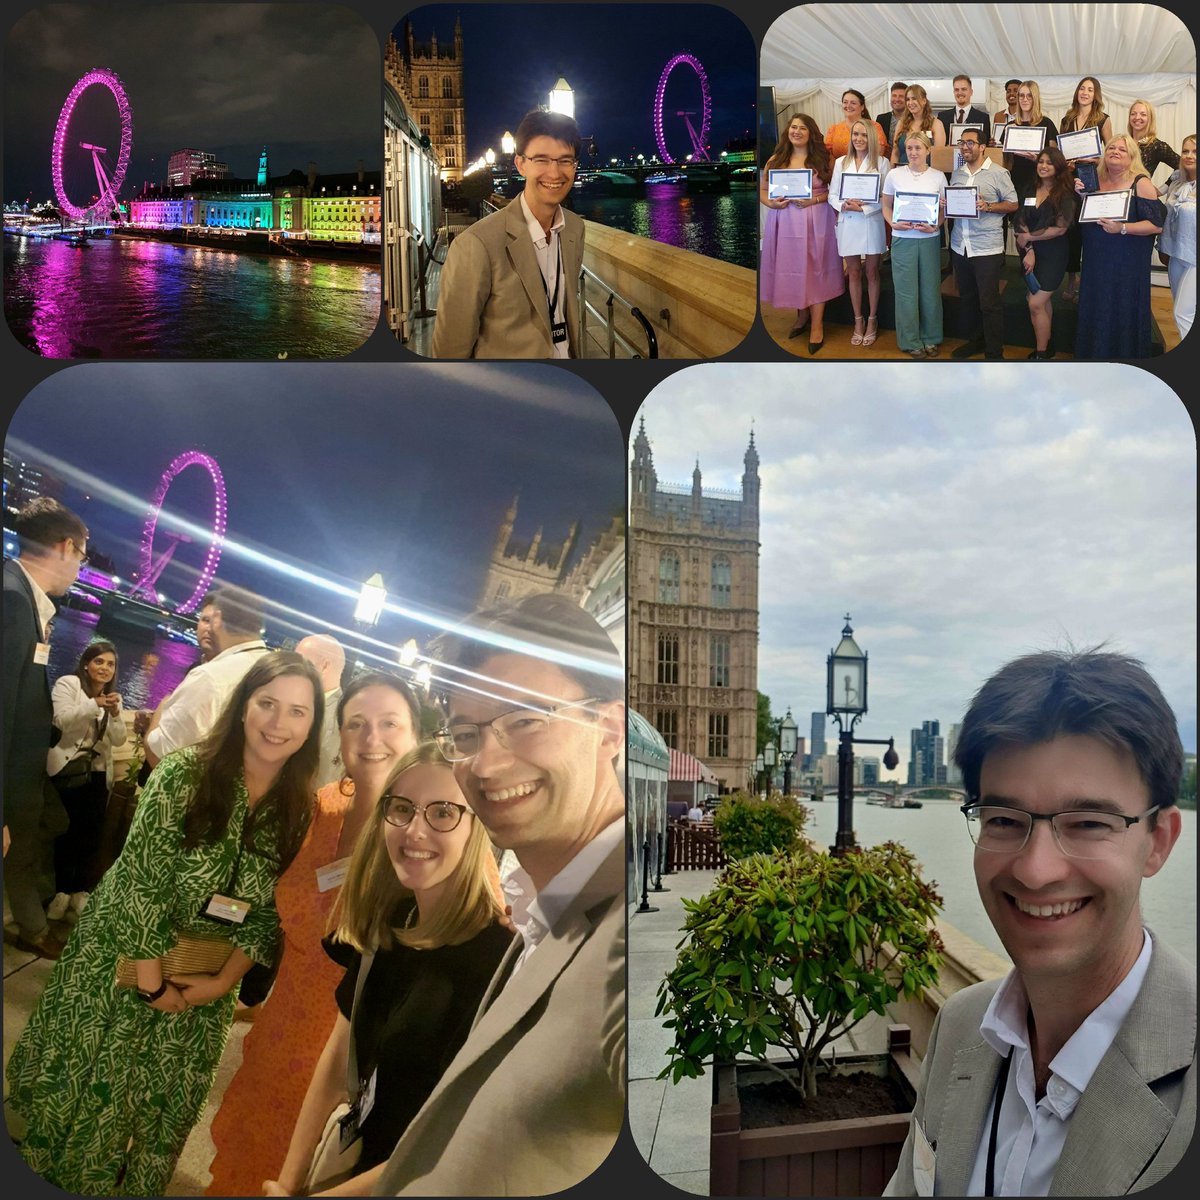 So much fun tonight at the Institute of Travel & Tourism's Summer Party and @ITTFutureYou Awards. The House of Commons providing a magical venue.

Congratulations to all the student winners!